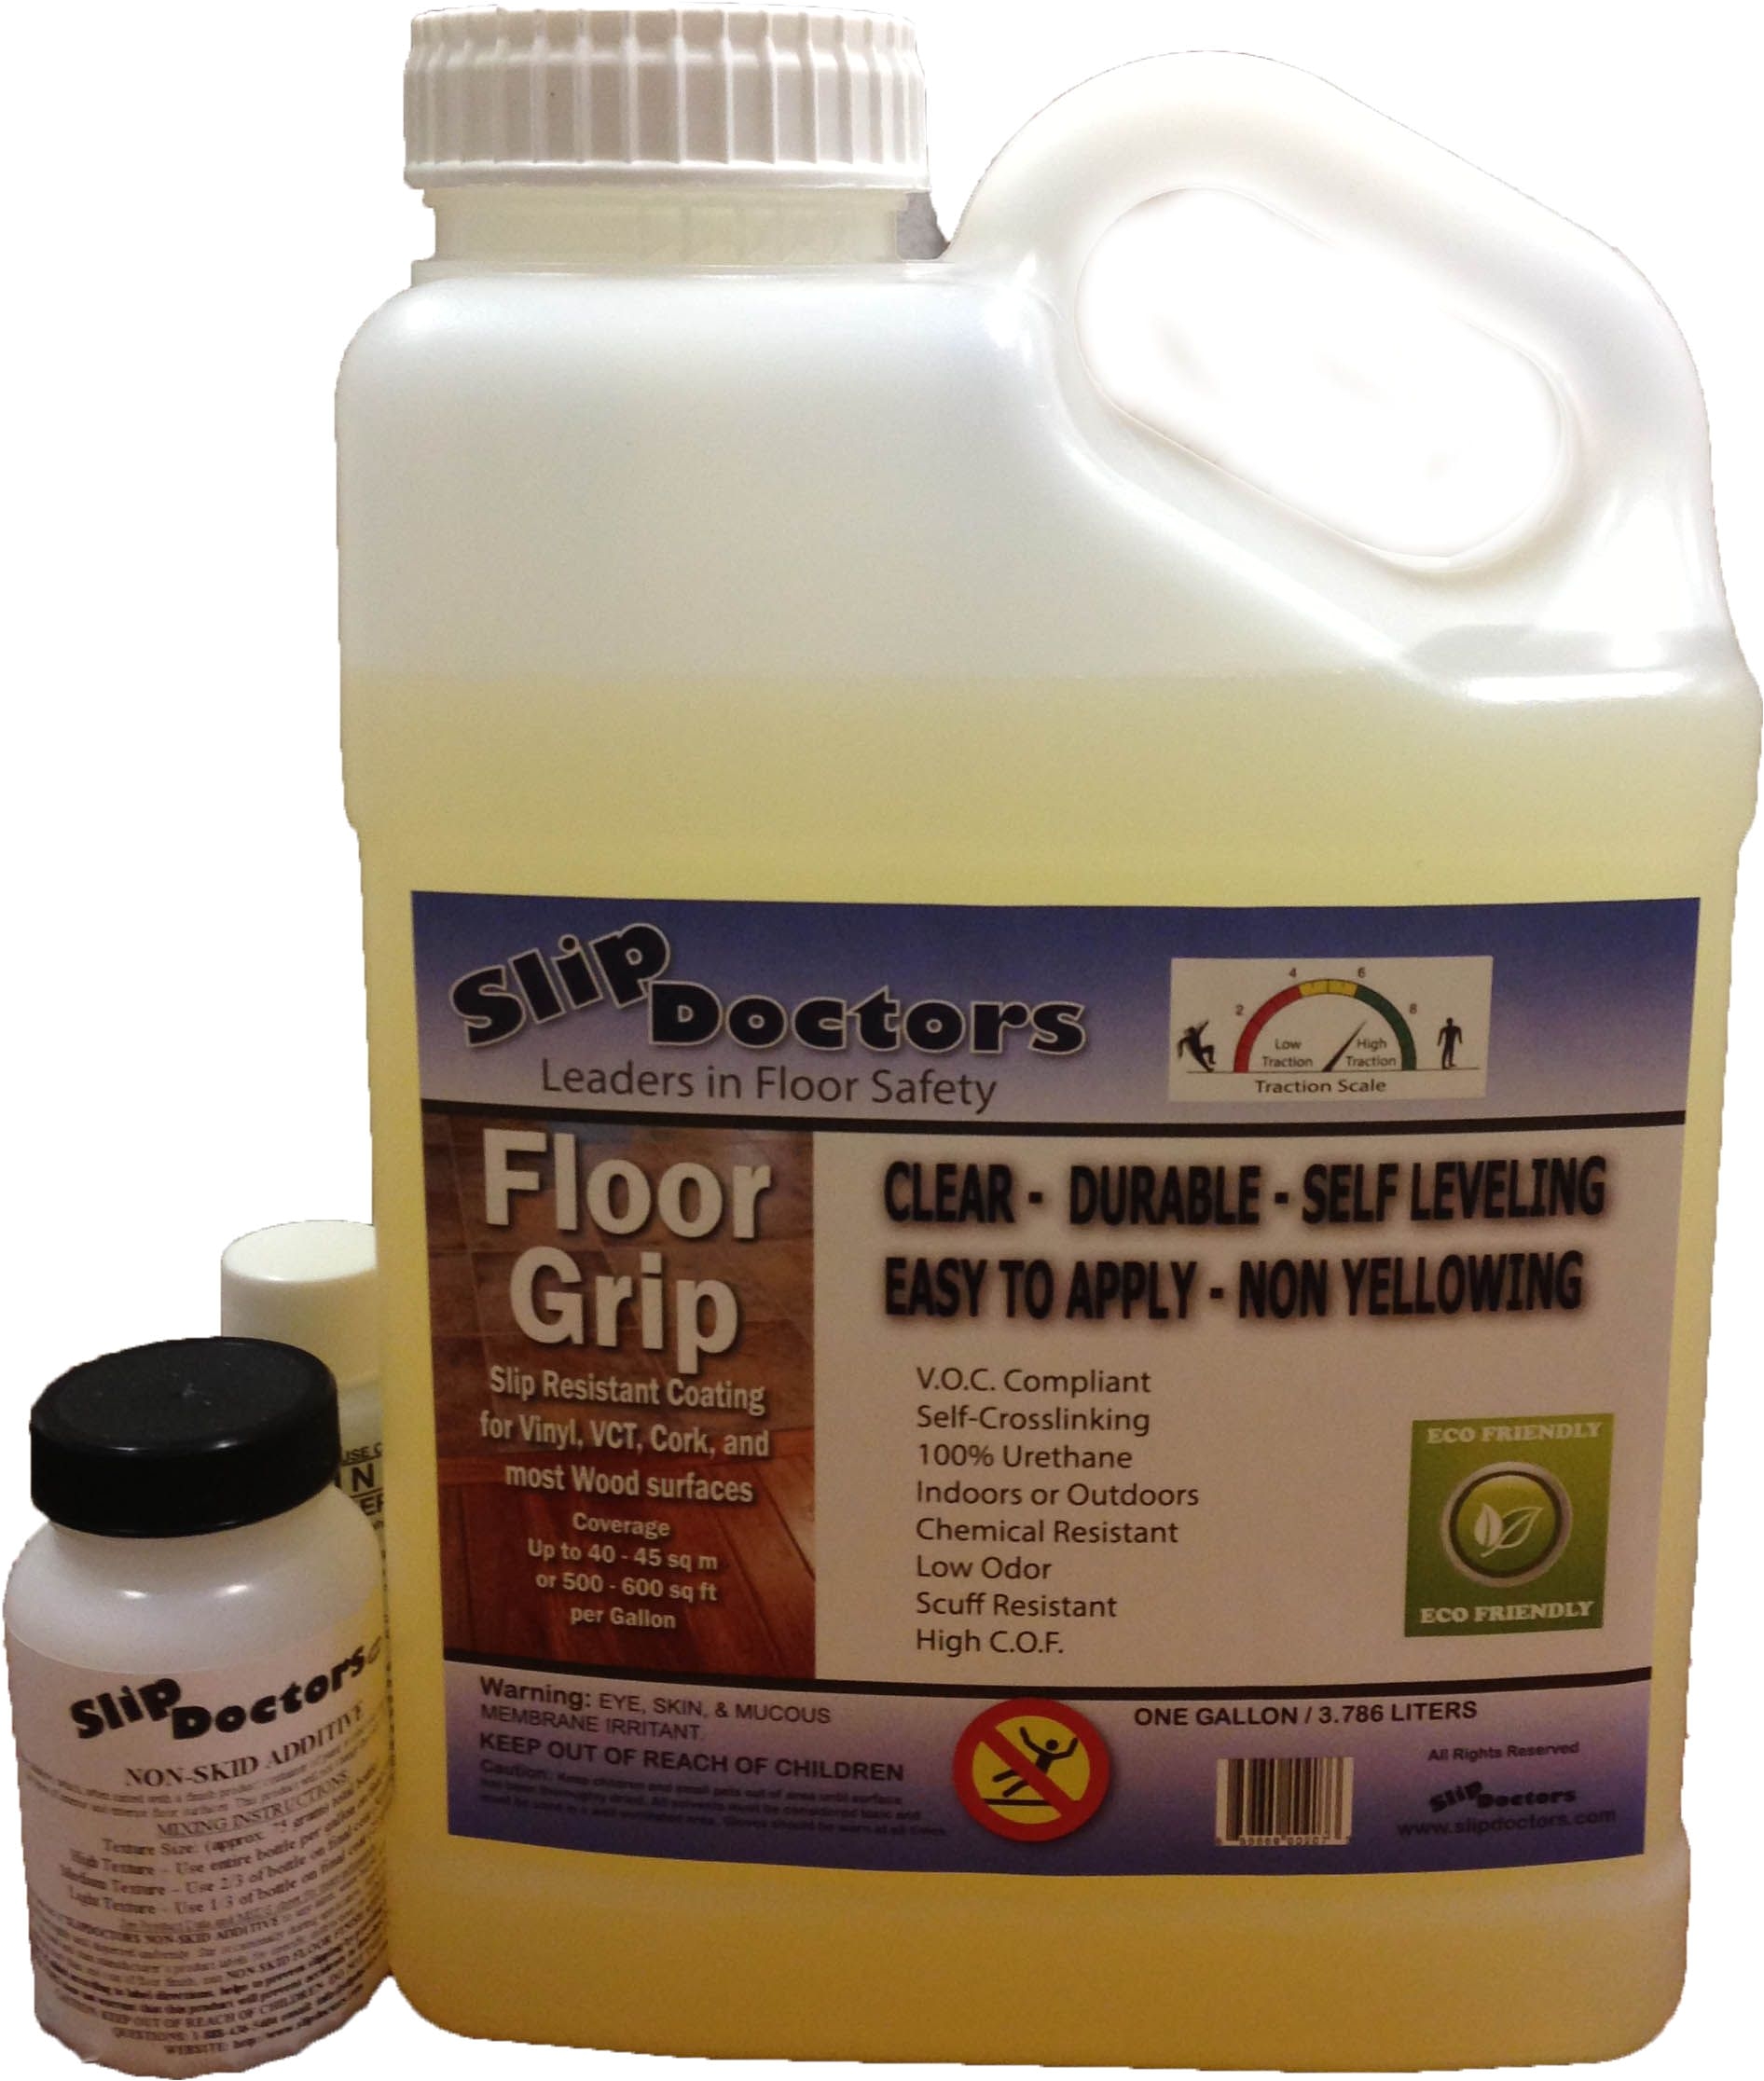 slip resistant coating for vinyl vct cork and most wood surfaces http www slipdoctors com products asp antislipcoating antislip slipcoating